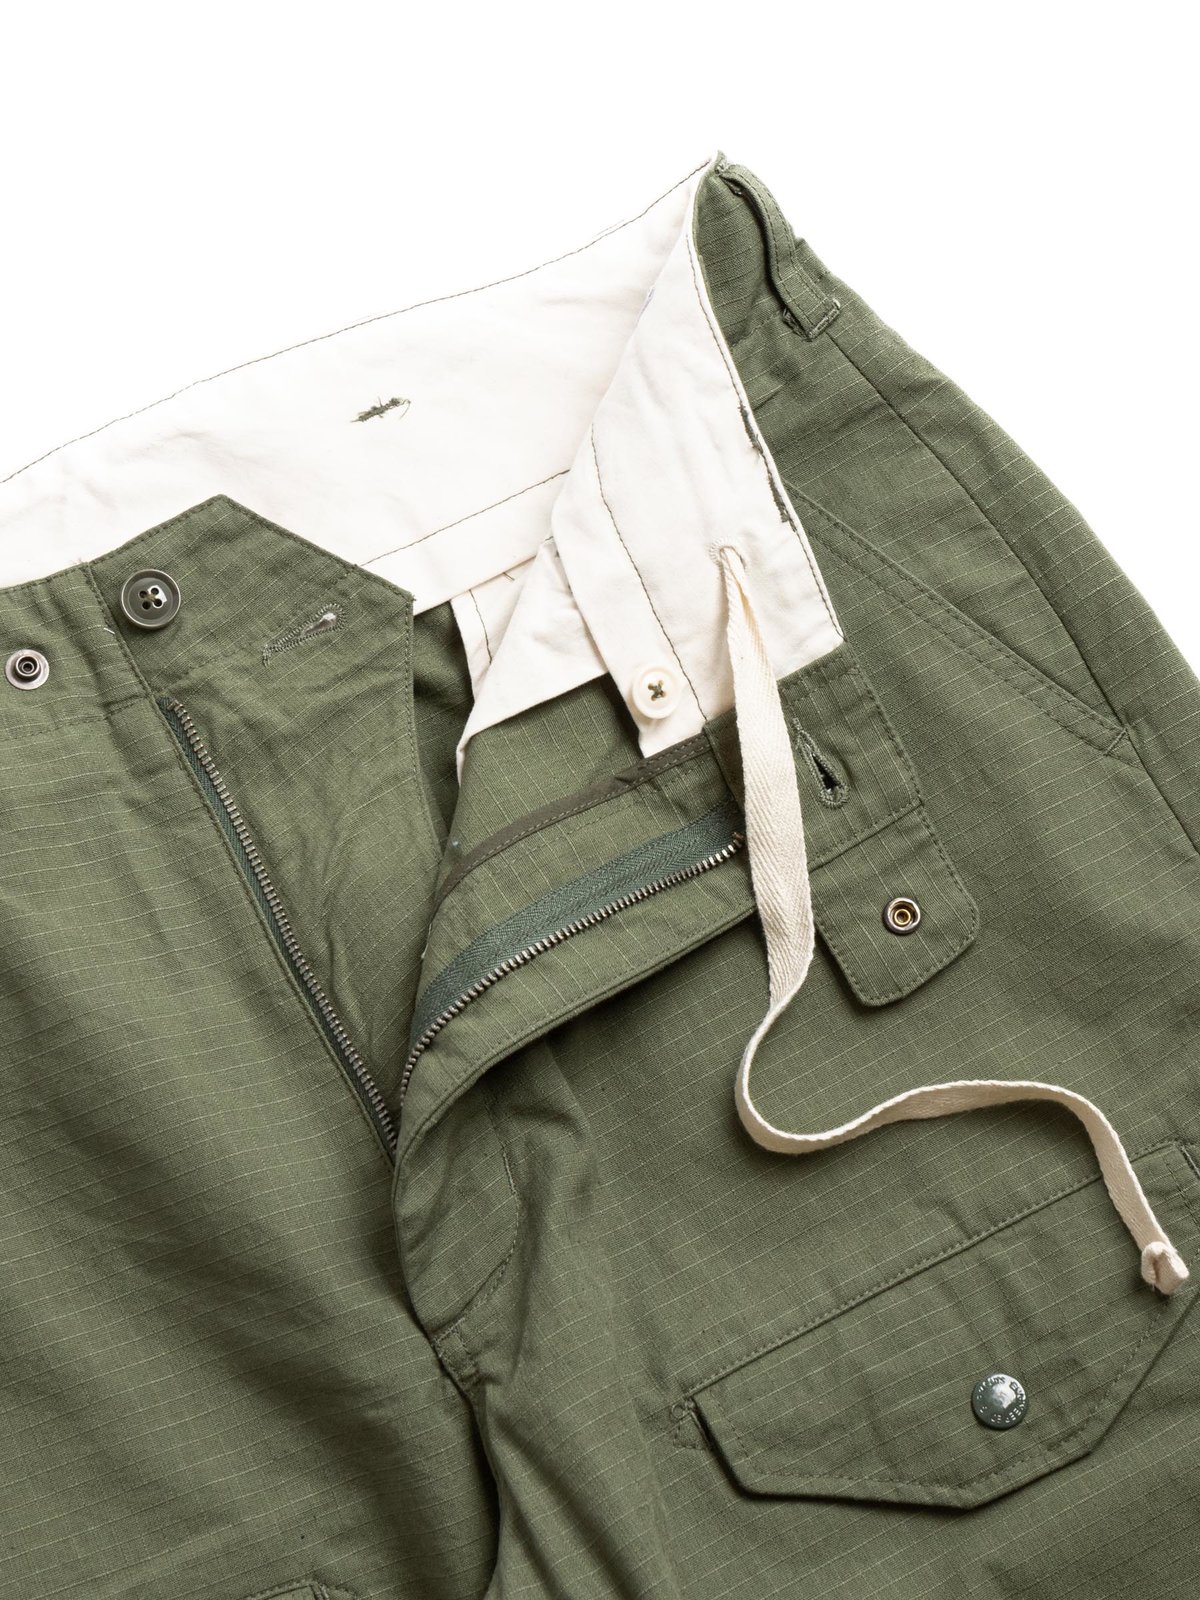 AIRBORNE PANT OLIVE COTTON RIPSTOP - Image 3